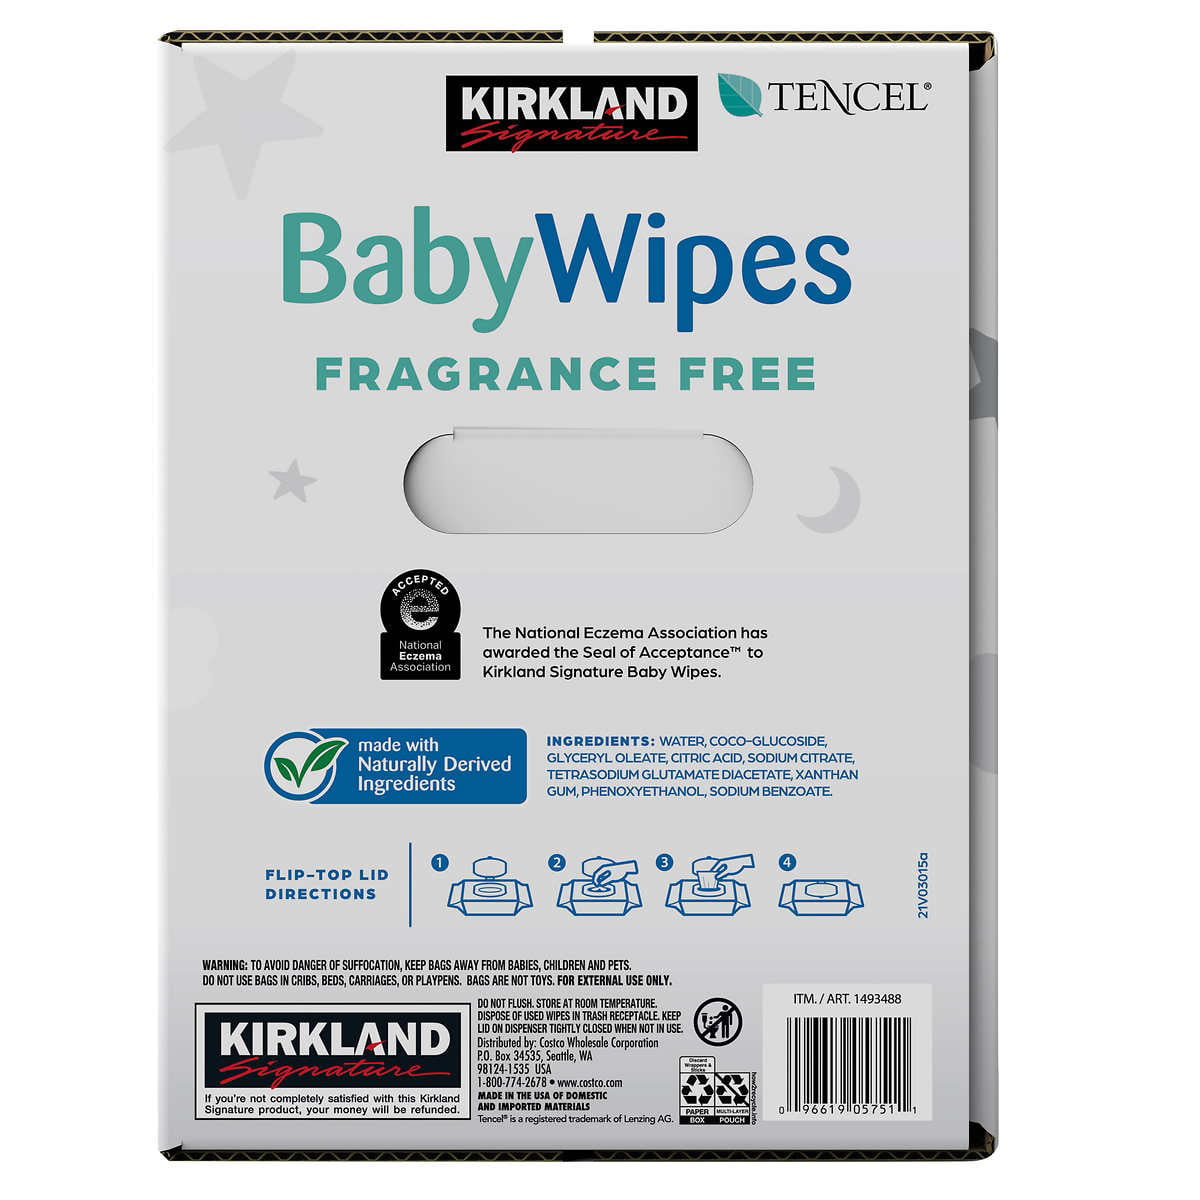 KIRKLAND SIGNATURE TENCEL BABY WIPES 900 PACK ESSENTIALS ULTRA SOFT DAILY USE 